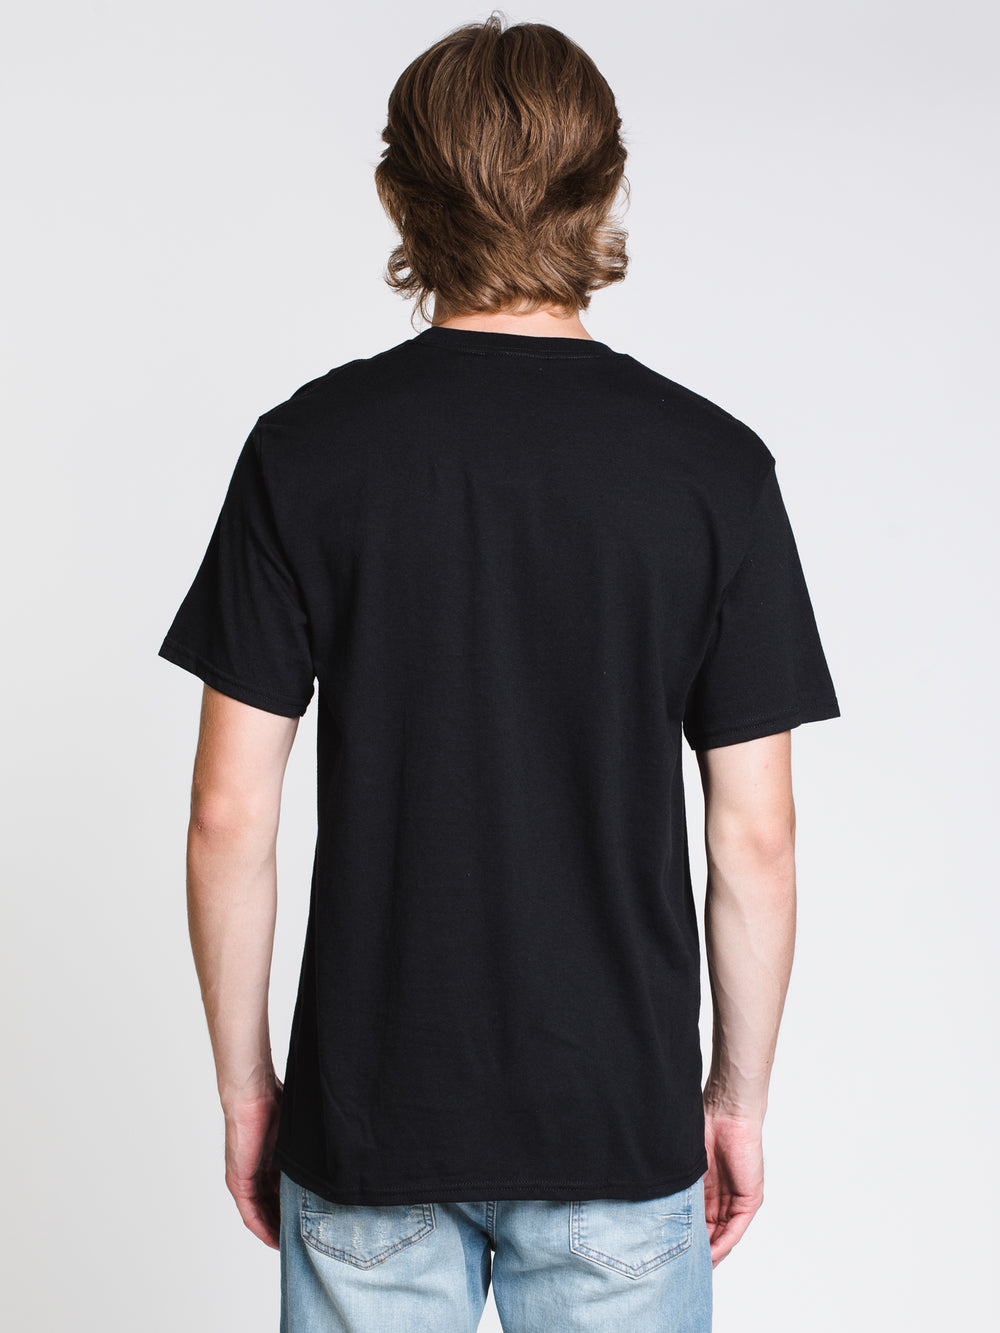 MENS MICAH S/S T - BLACK - CLEARANCE